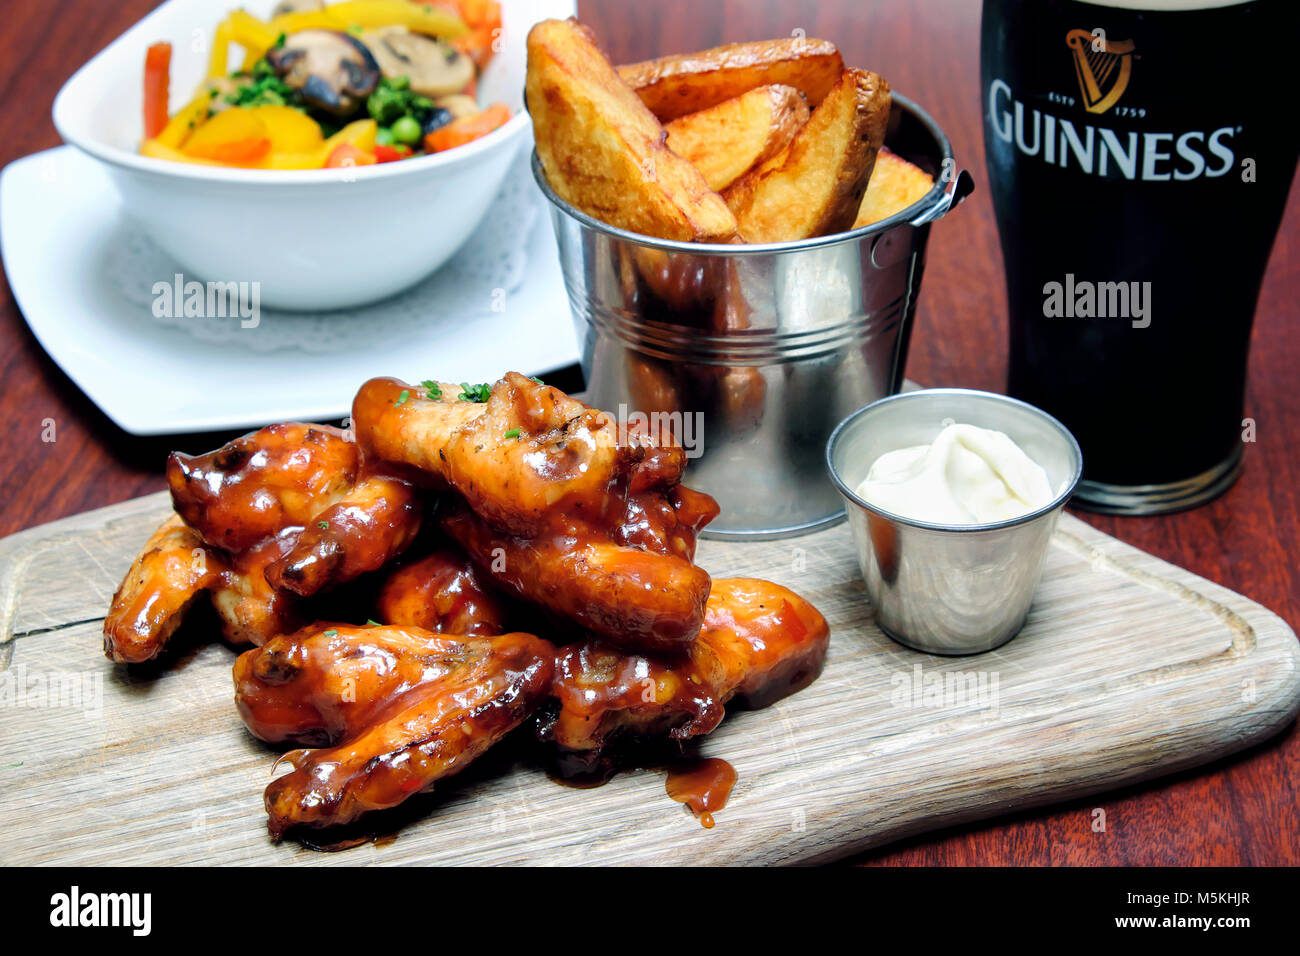 Chicken wings tossed in bbq and sweet chilli sauce served with blue cheese dip, chips and a pint of Guinness, Doheny & Nesbitt Pub, Dublin, Ireland Stock Photo